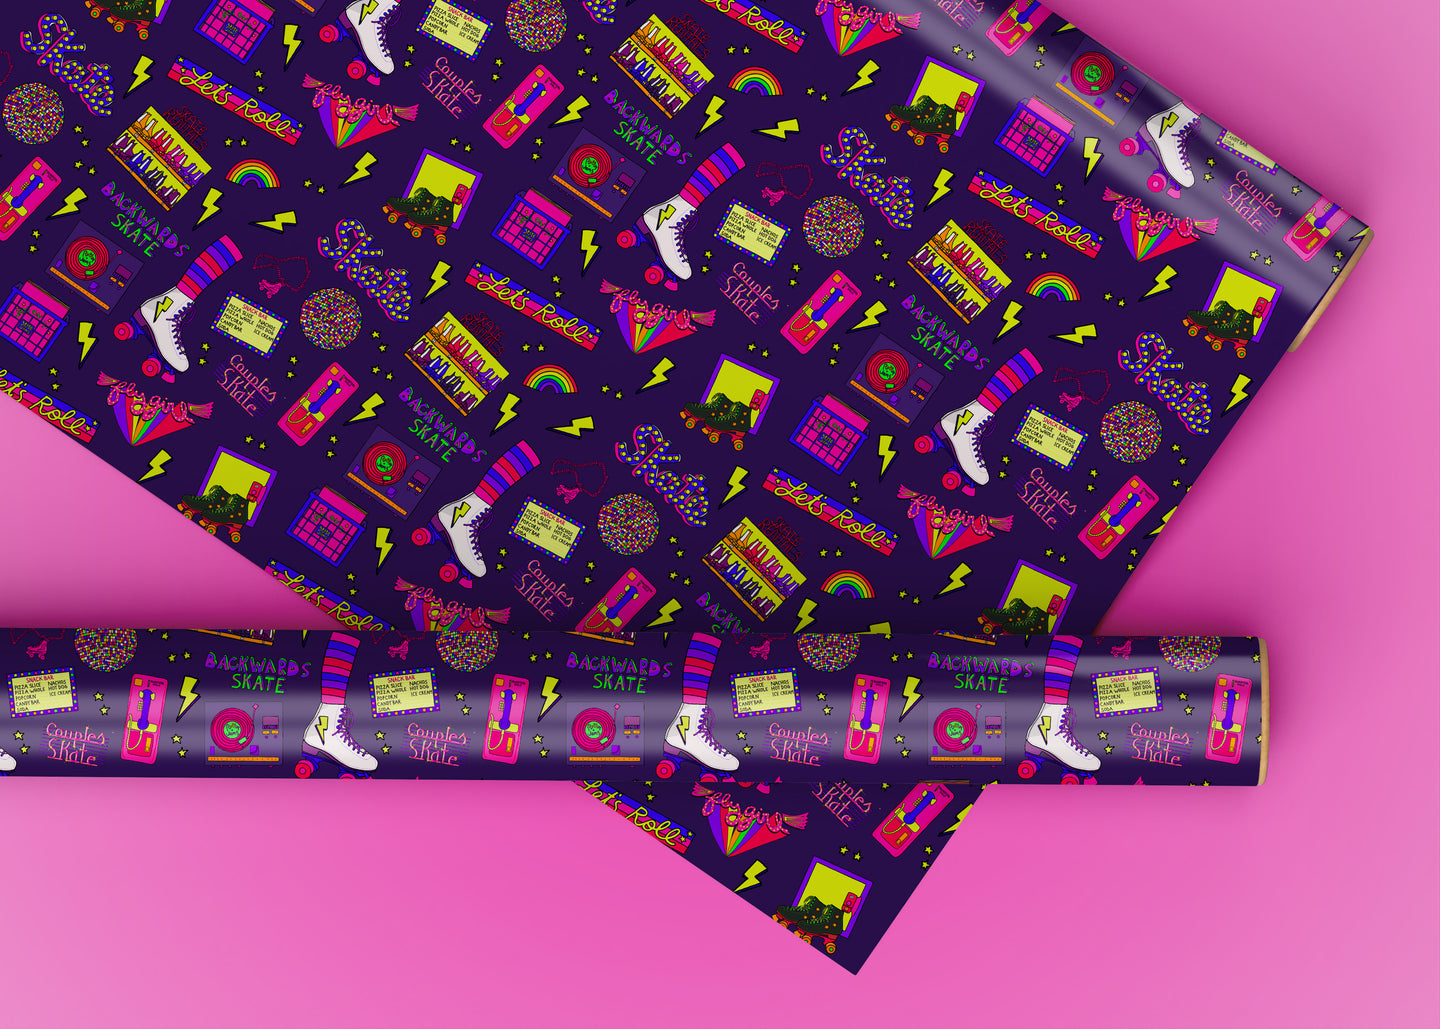 80's Skating Rink Specialty Art Wrapping Paper One of a Kind